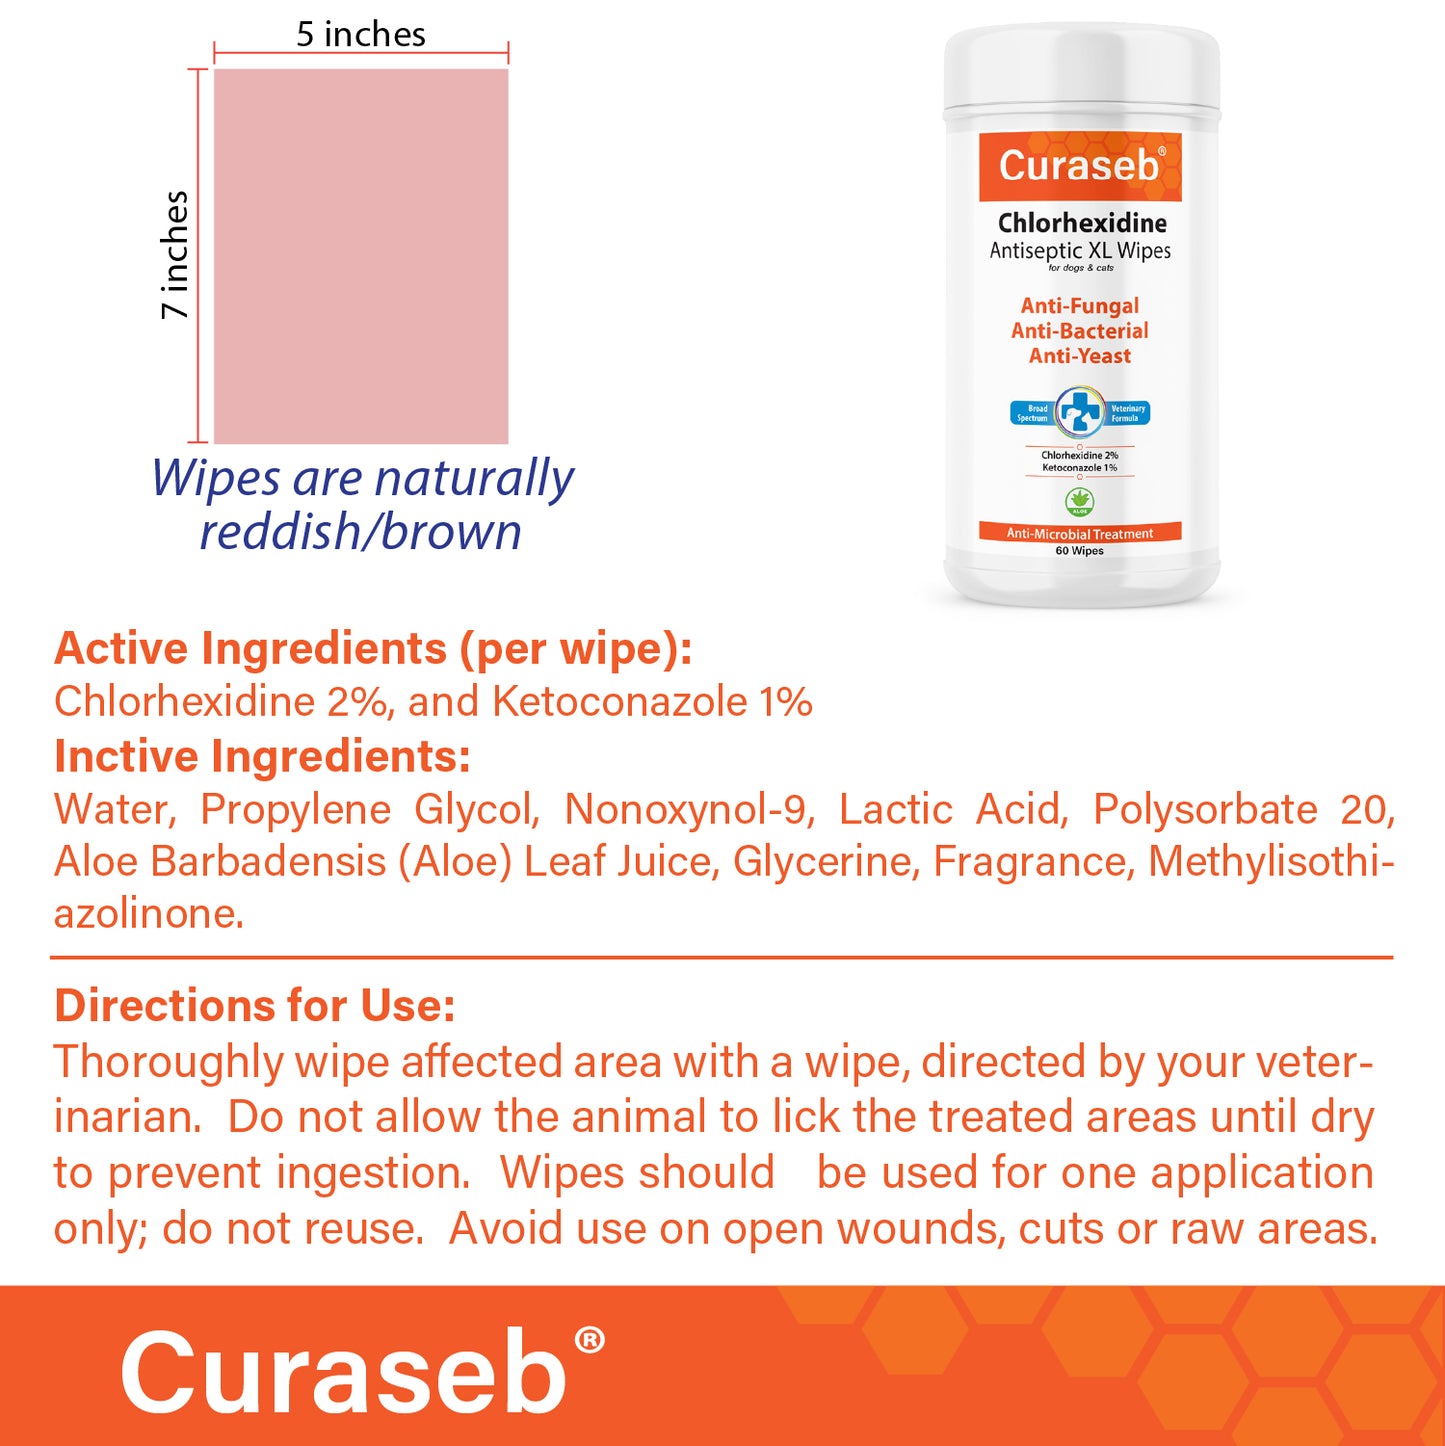 Curaseb Medicated Wipes XL - Chlorhexidine & Ketoconazole for Dogs and Cats